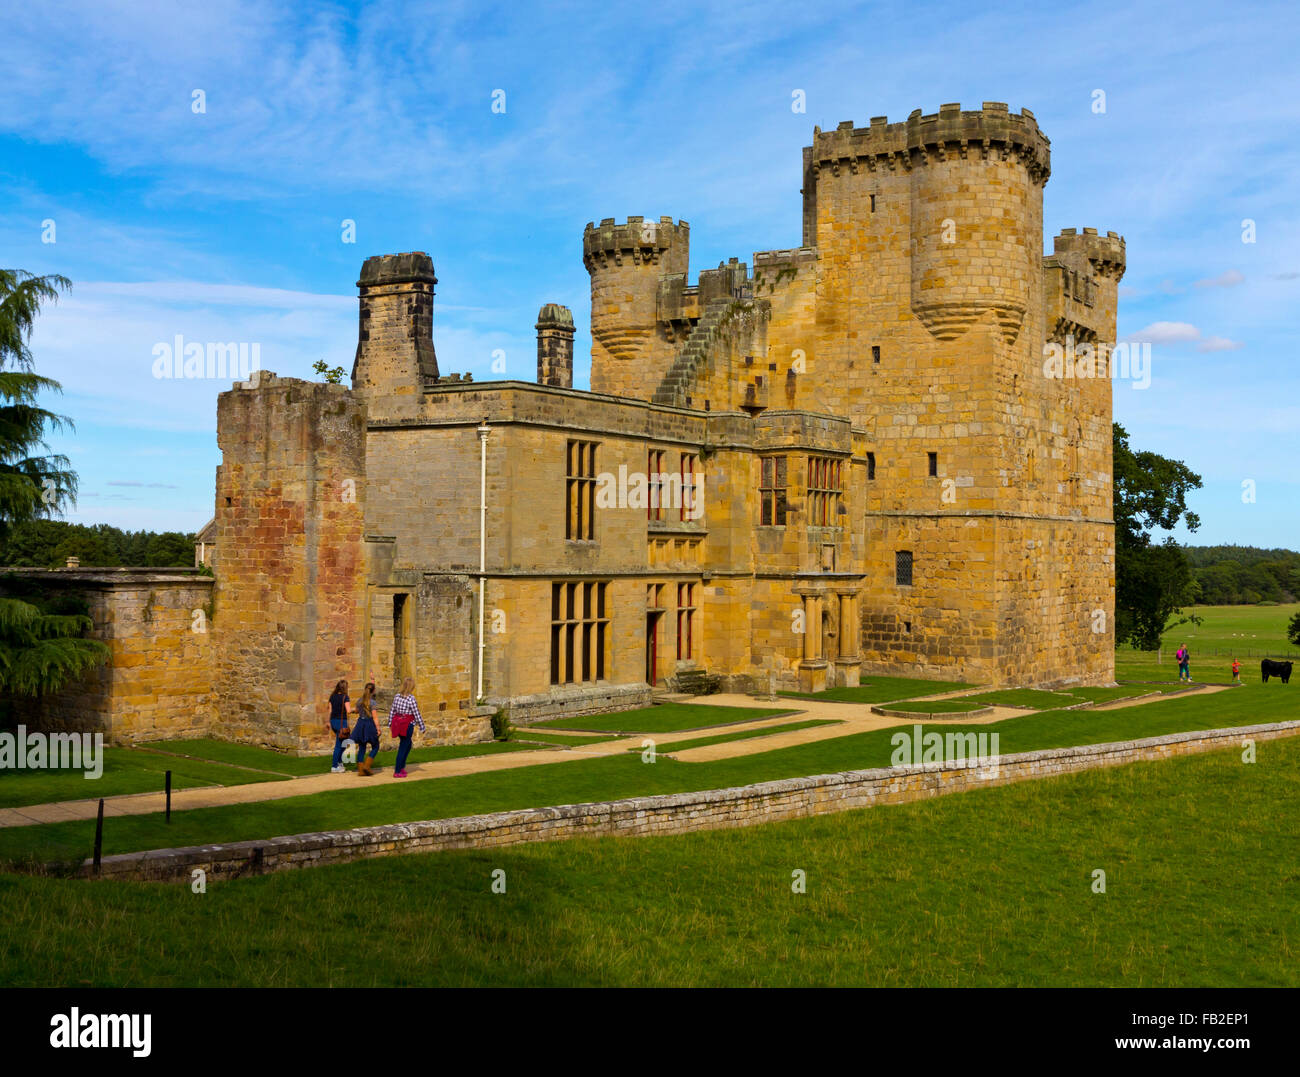 Belsay Castle a 14th-century medieval castle in Northumberland England UK a Scheduled Ancient Monument Stock Photo